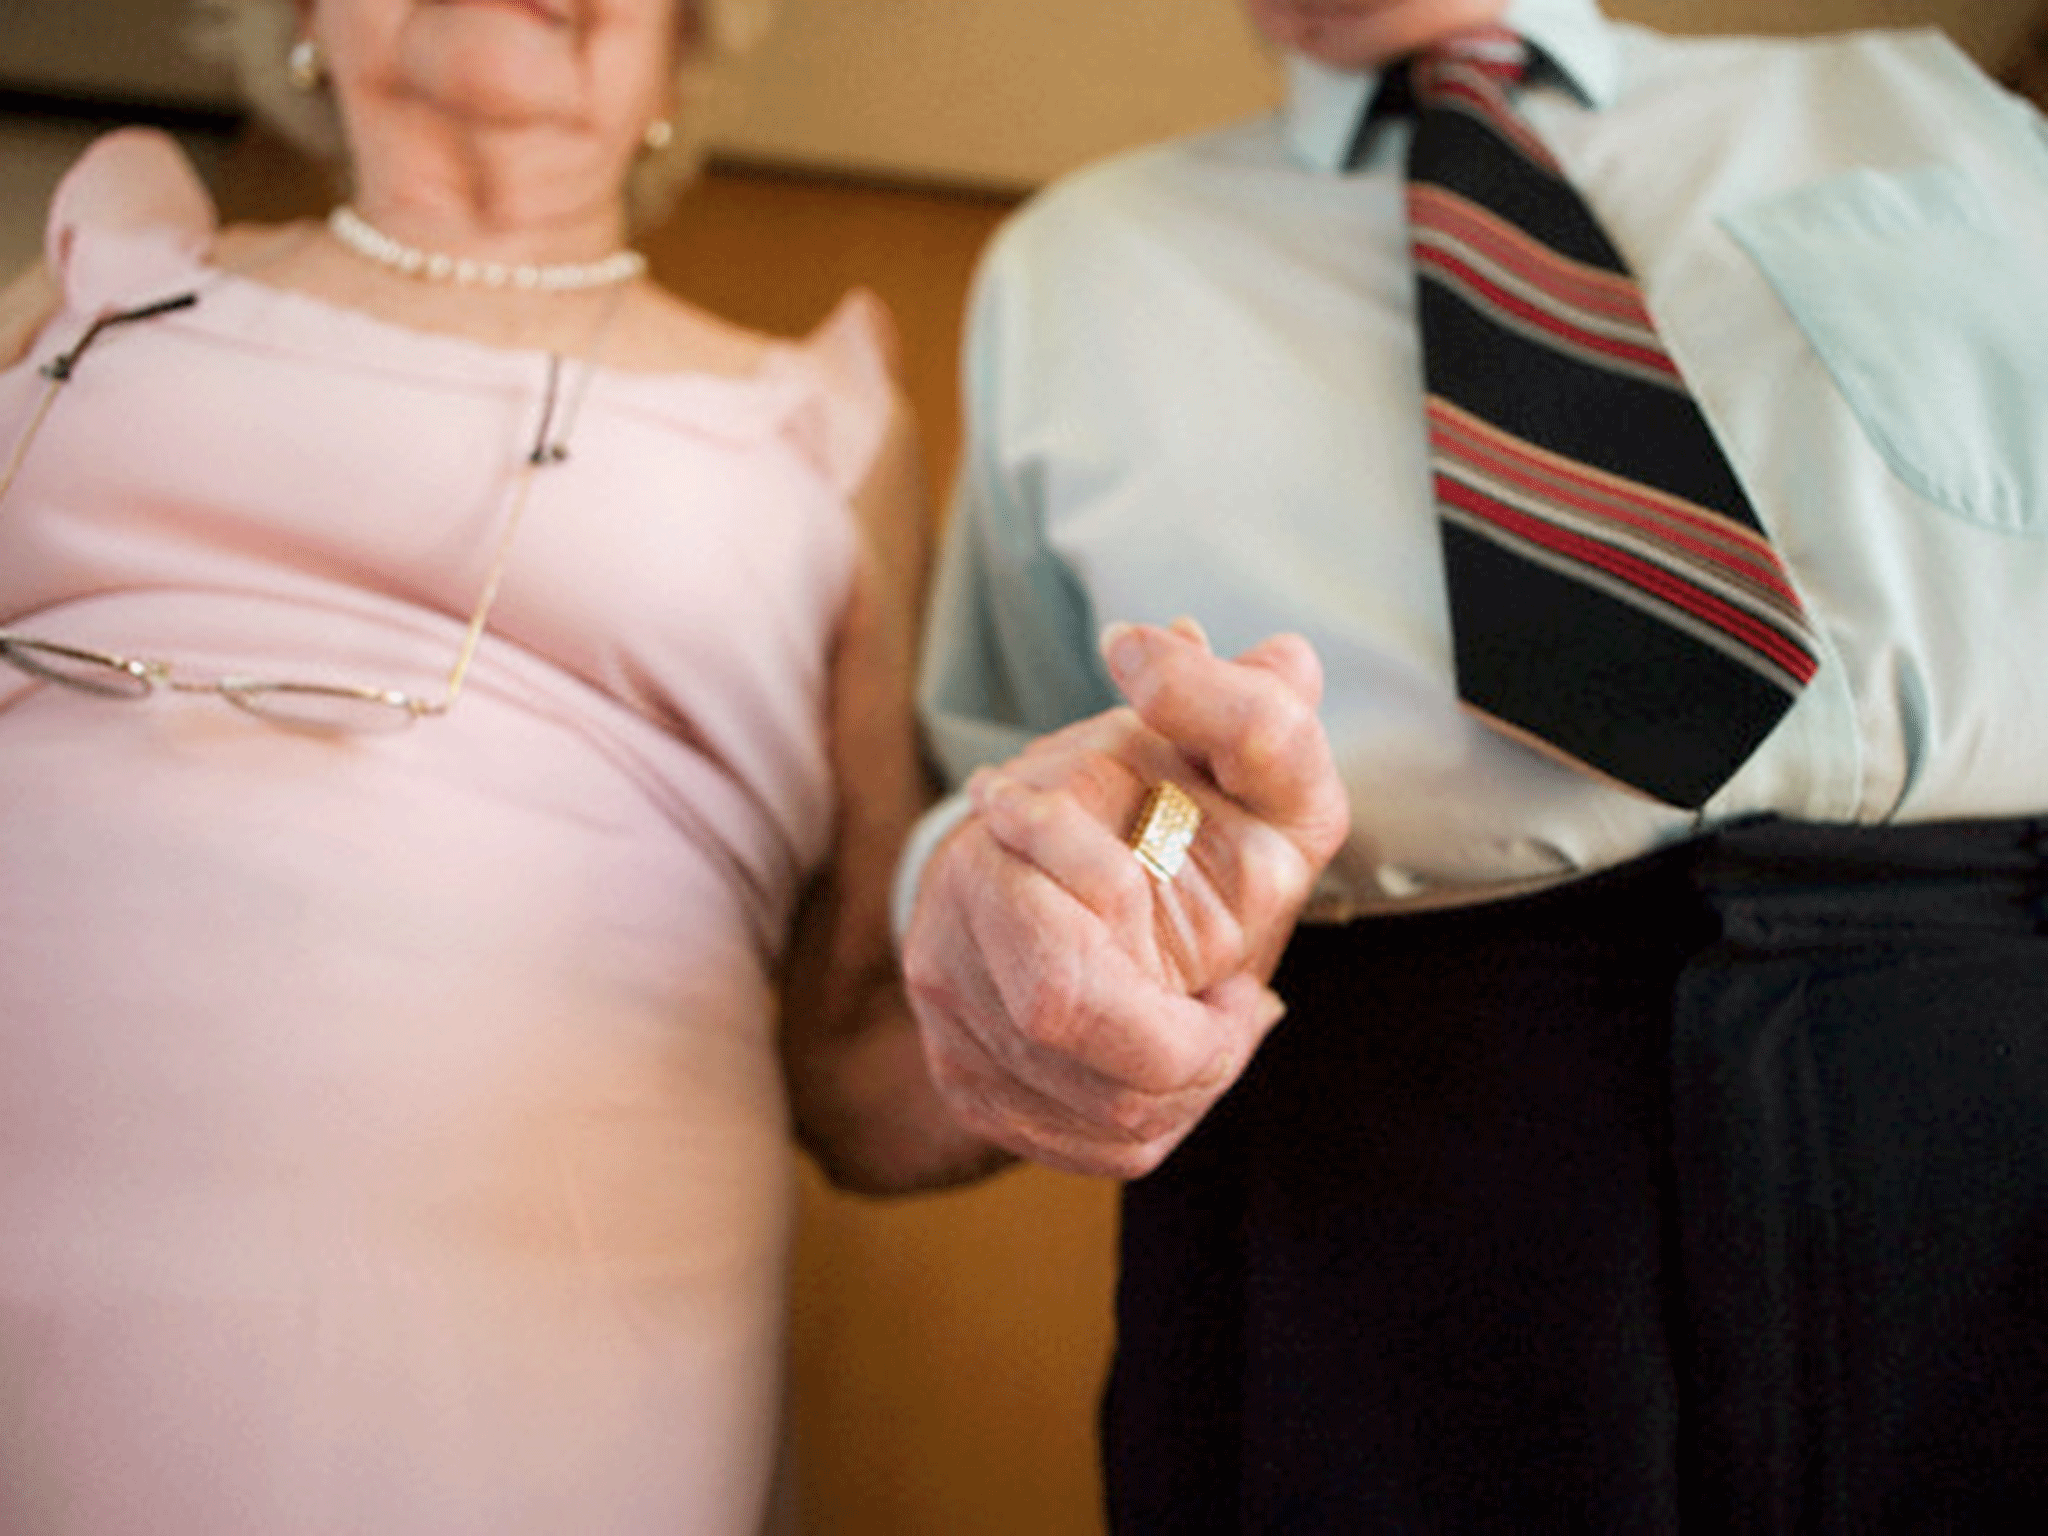 Waiting before marriage can lead to a higher chance of a lasting relationship